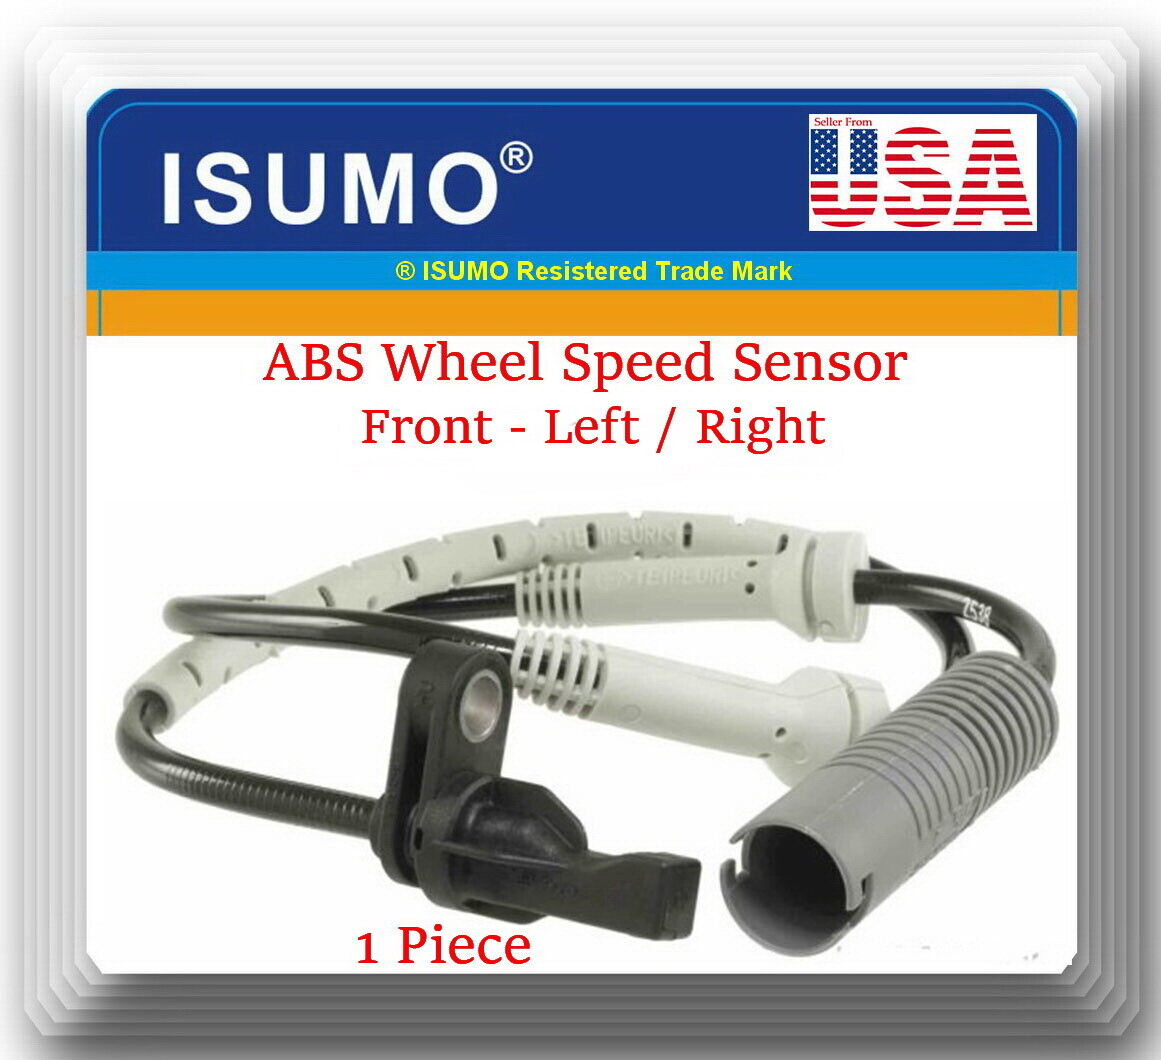 ABS Wheel Speed Sensor Front Left or Right Fits:128 135 323 325 328 330 335 335D